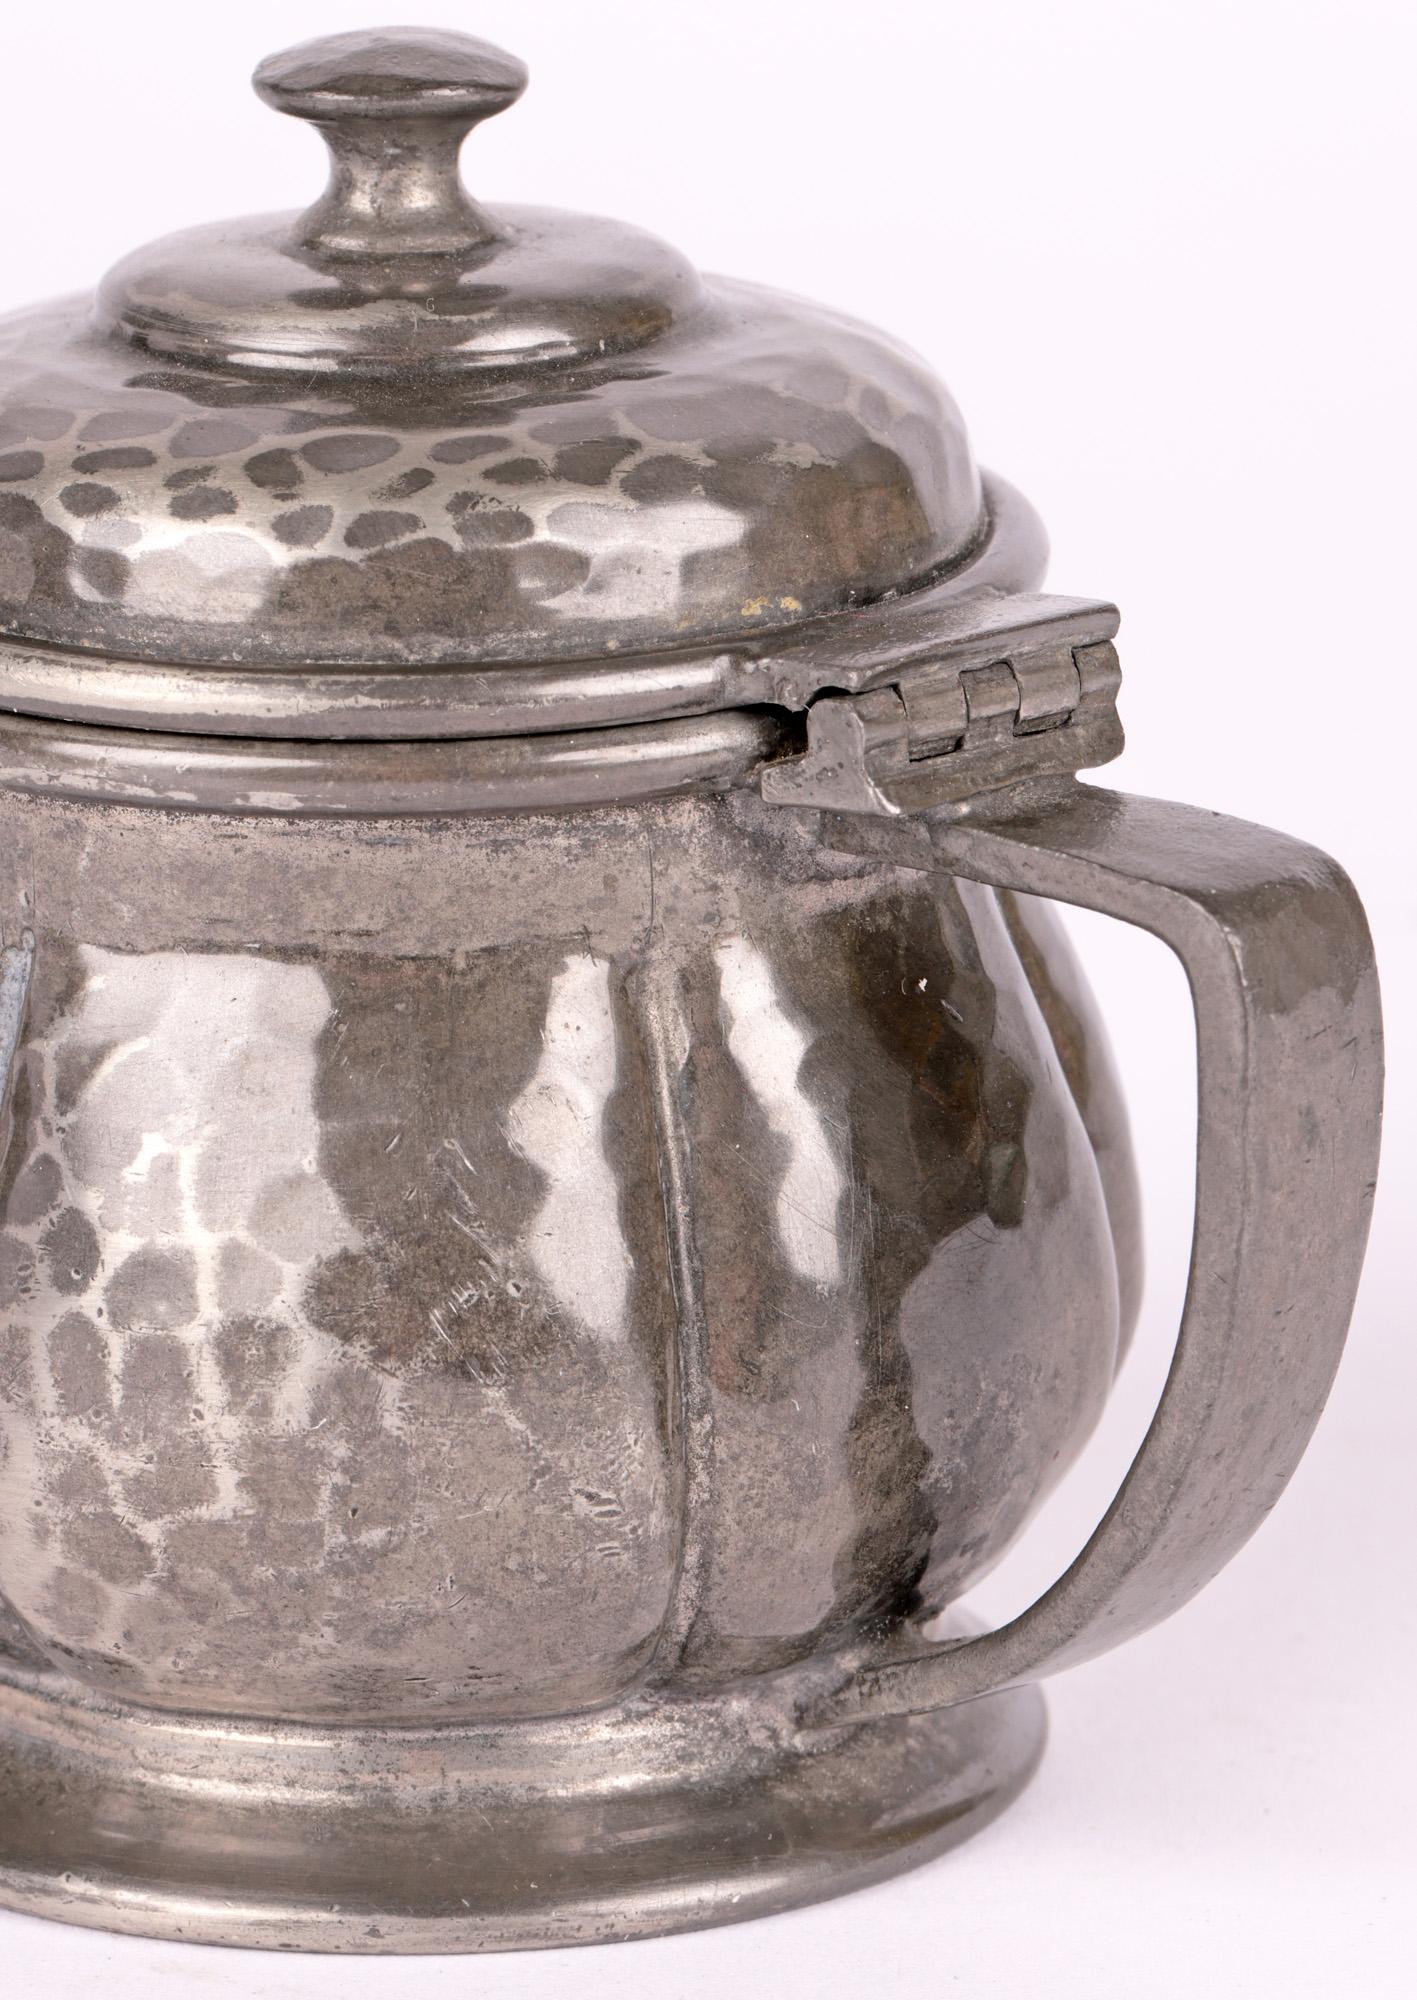 A very fine Arts & Crafts English pewter mustard pot with original glass liner made for Liberty & Co by Tudric and dating from the early 20th century. The mustard pot stands raised on a wide skirted foot and has a round gourd shaped body with flat